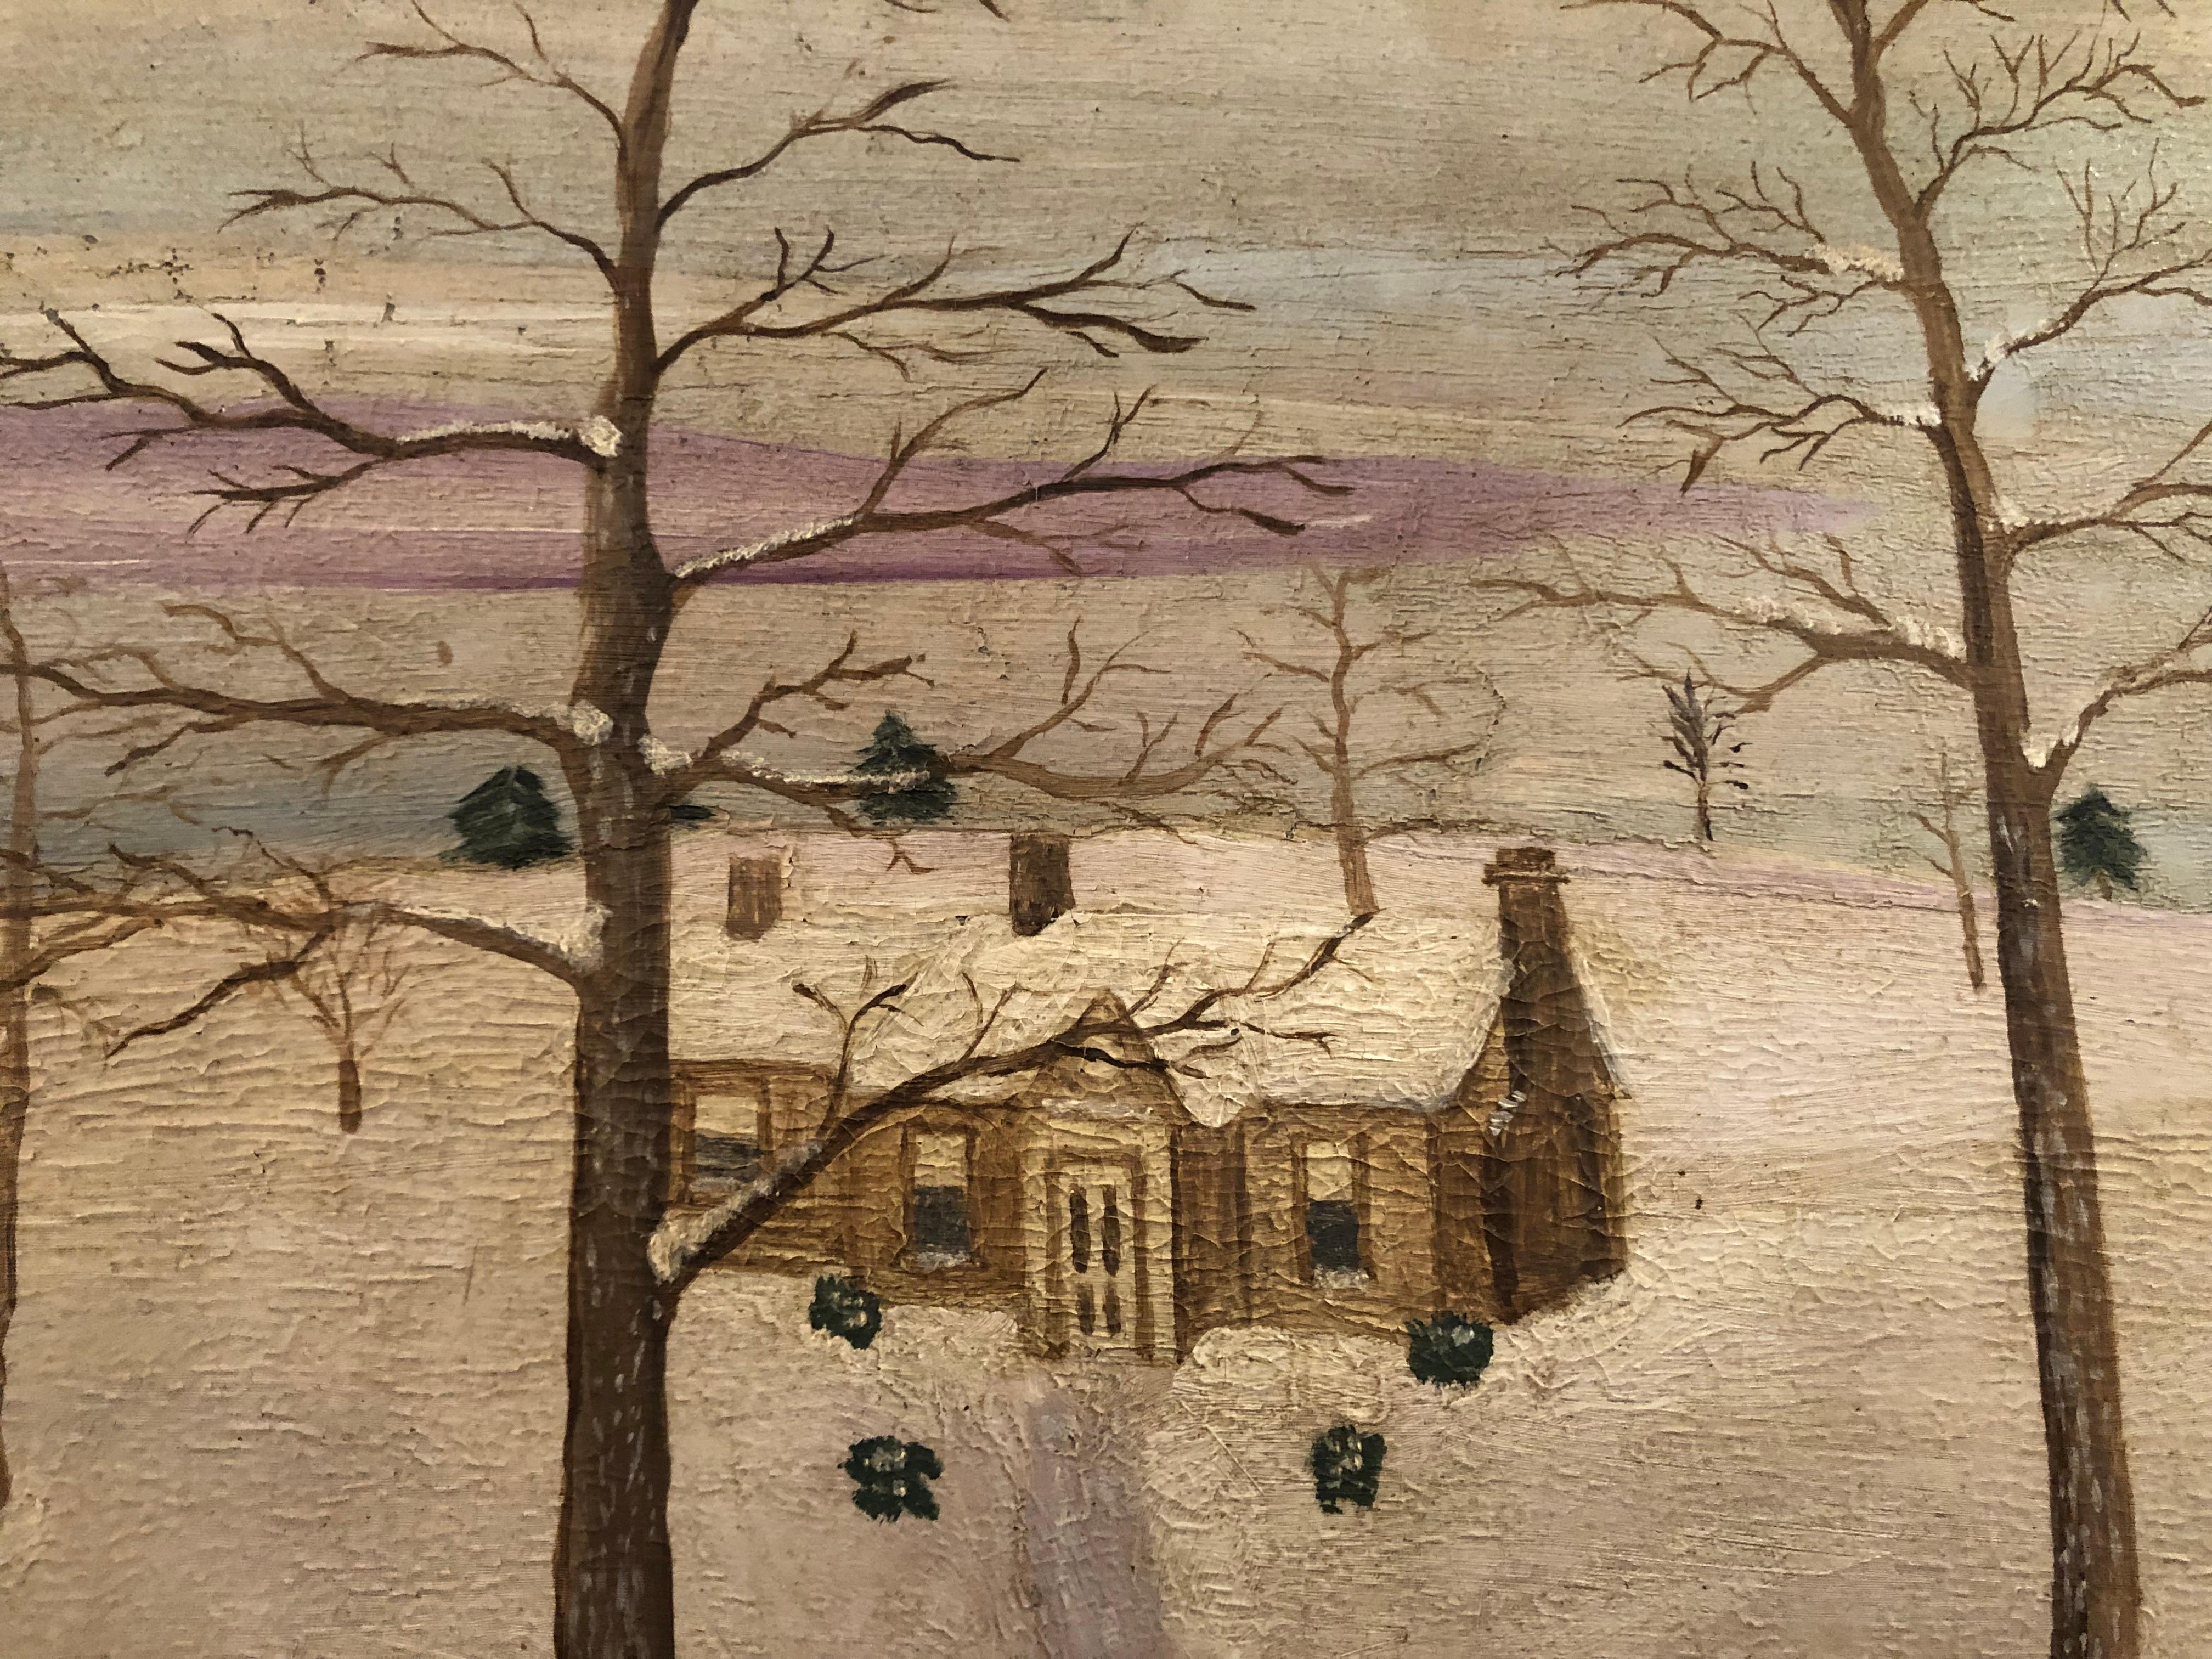 A 20th century folk art landscape painting of a winter scene, with a log cabin and village  church in the distance. Oil painting on masonite. In a hand carved oak frame.
Indistinctly signed on the lower right hand corner.
A very evocative scene with